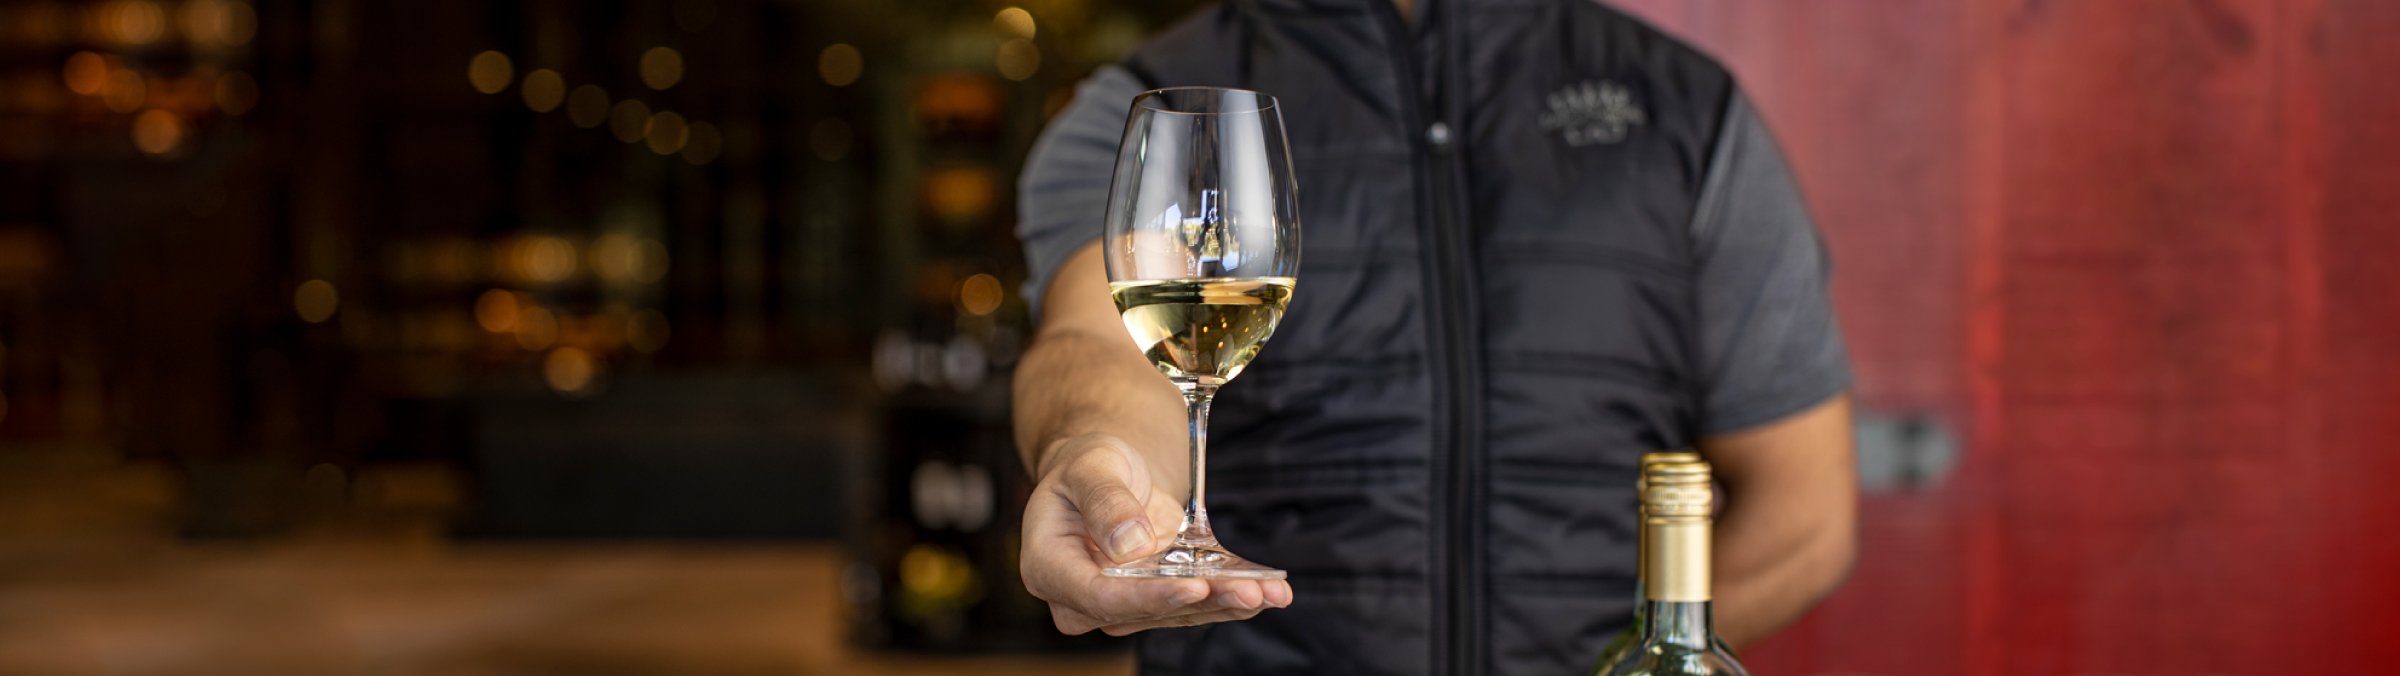 Man holding out a glass of white wine.